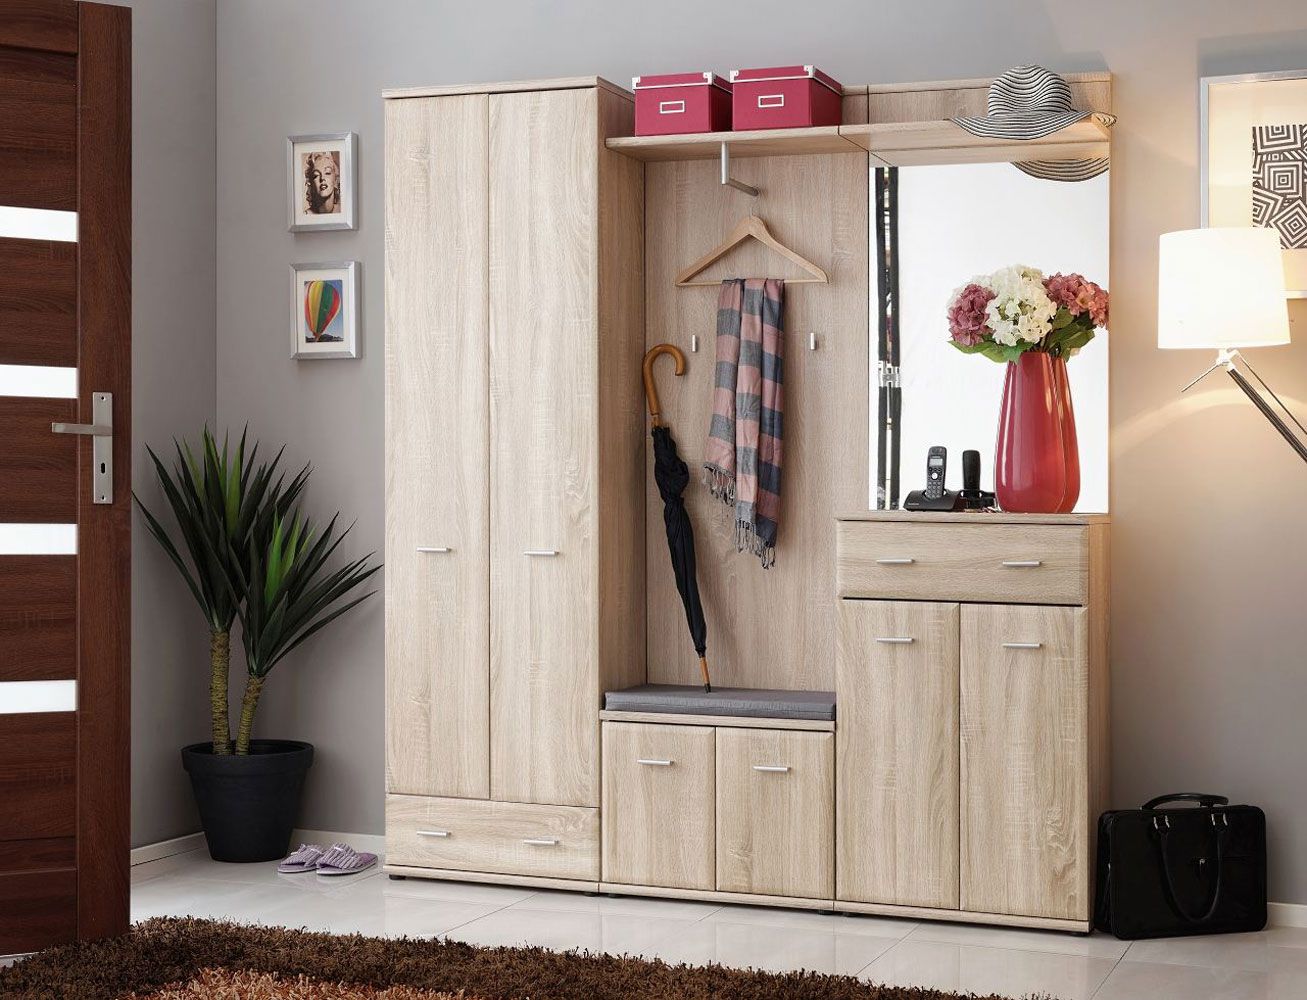 Wardrobe with sufficient storage space Bratteli 06, color: oak Sonoma - Dimensions: 203 x 180 x 32 cm (H x W x D), with seat cushion